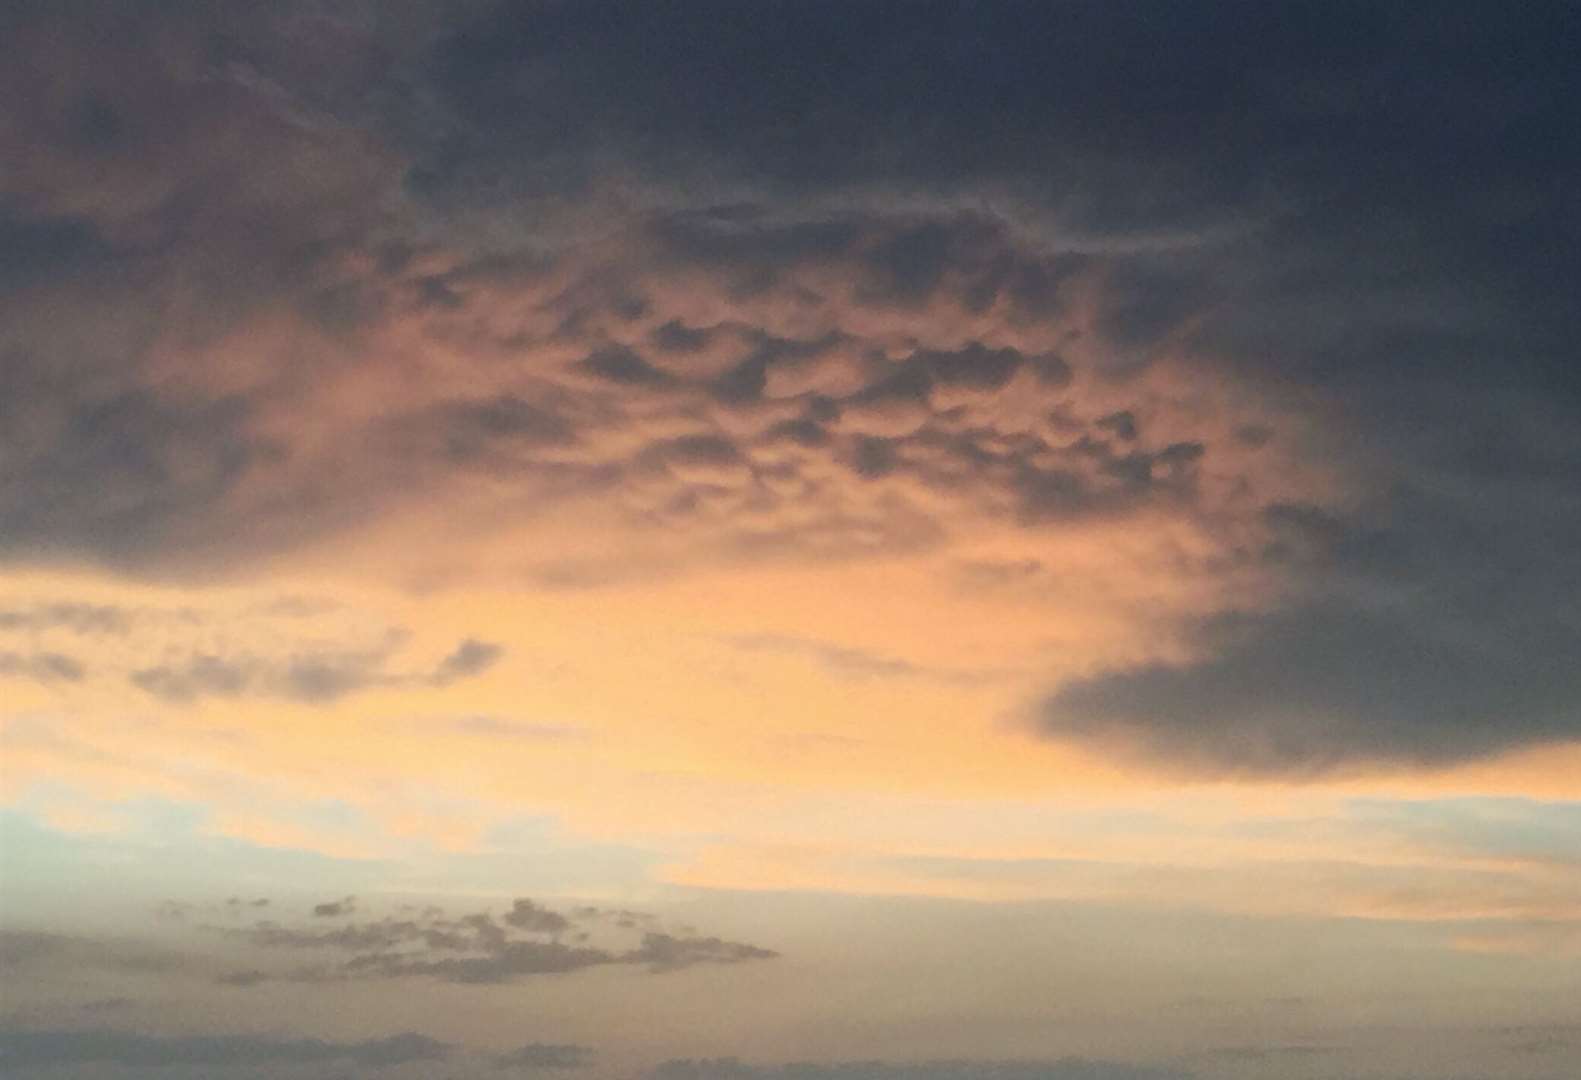 The rare mammatus clouds were spotted in Eccles